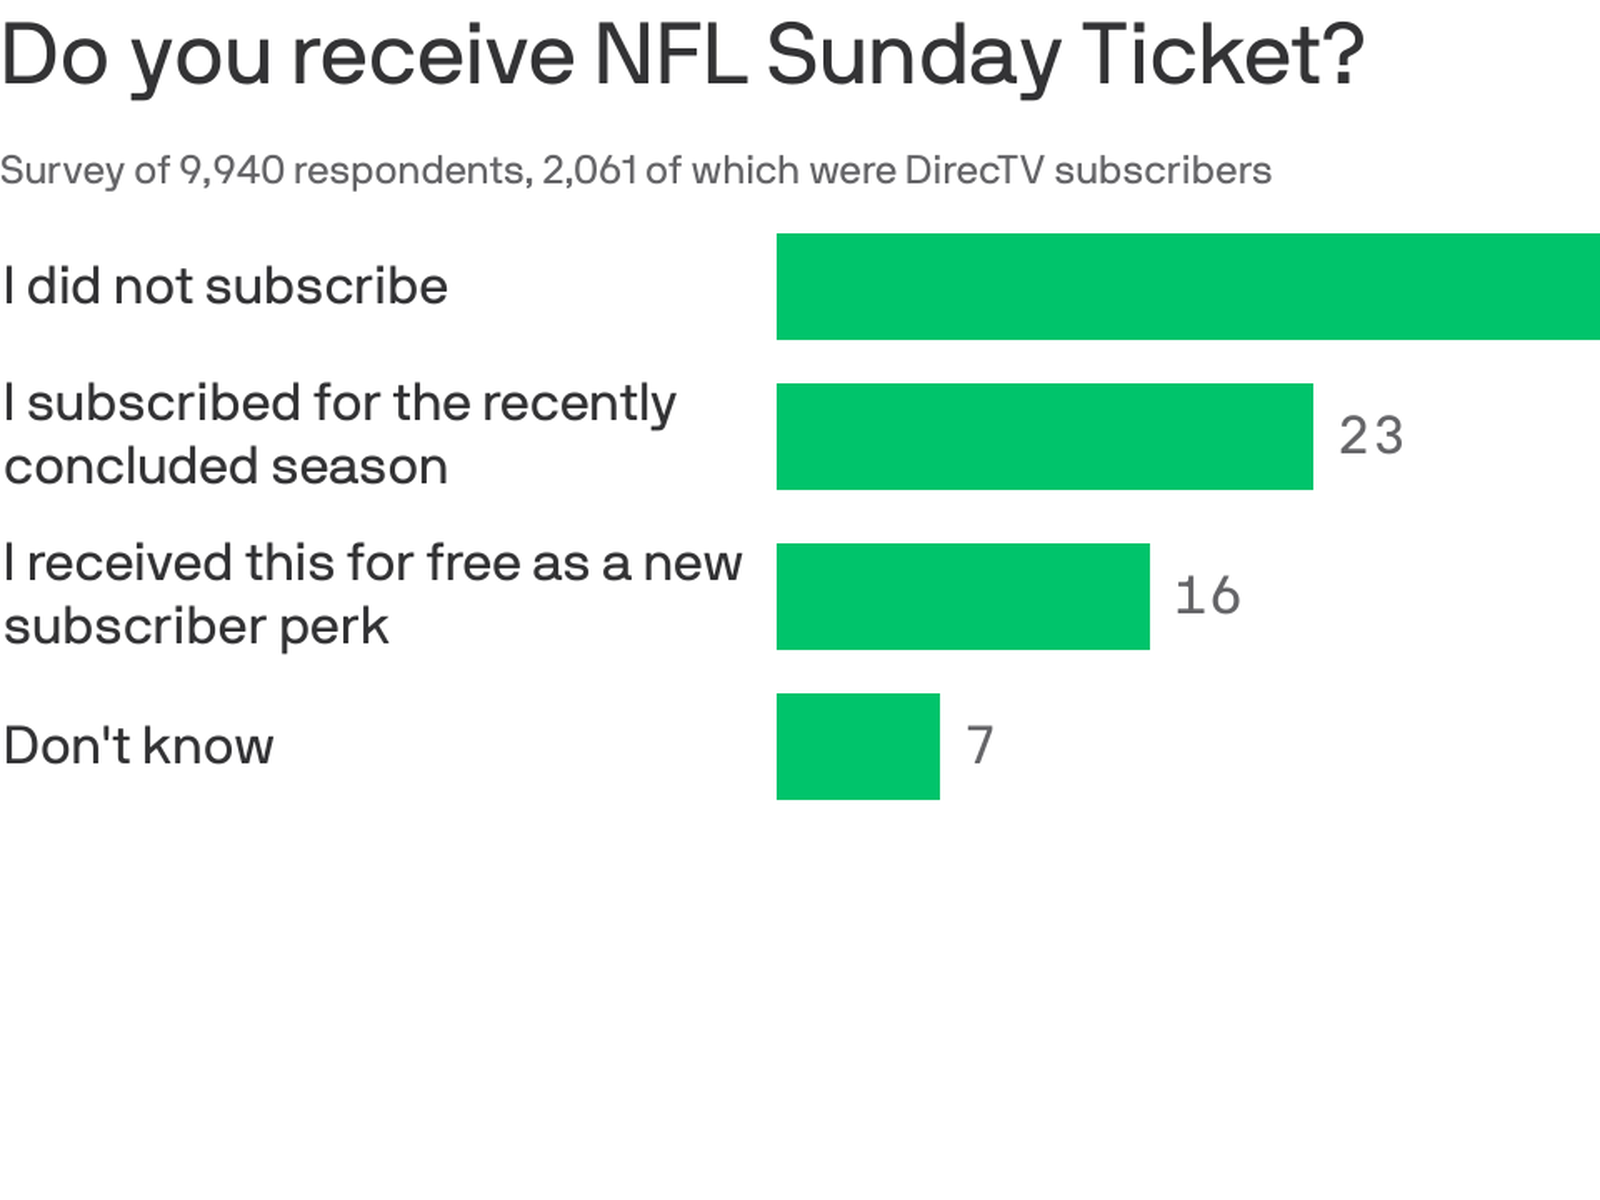 Less than one quarter of DirecTV subs pay for NFL Sunday Ticket